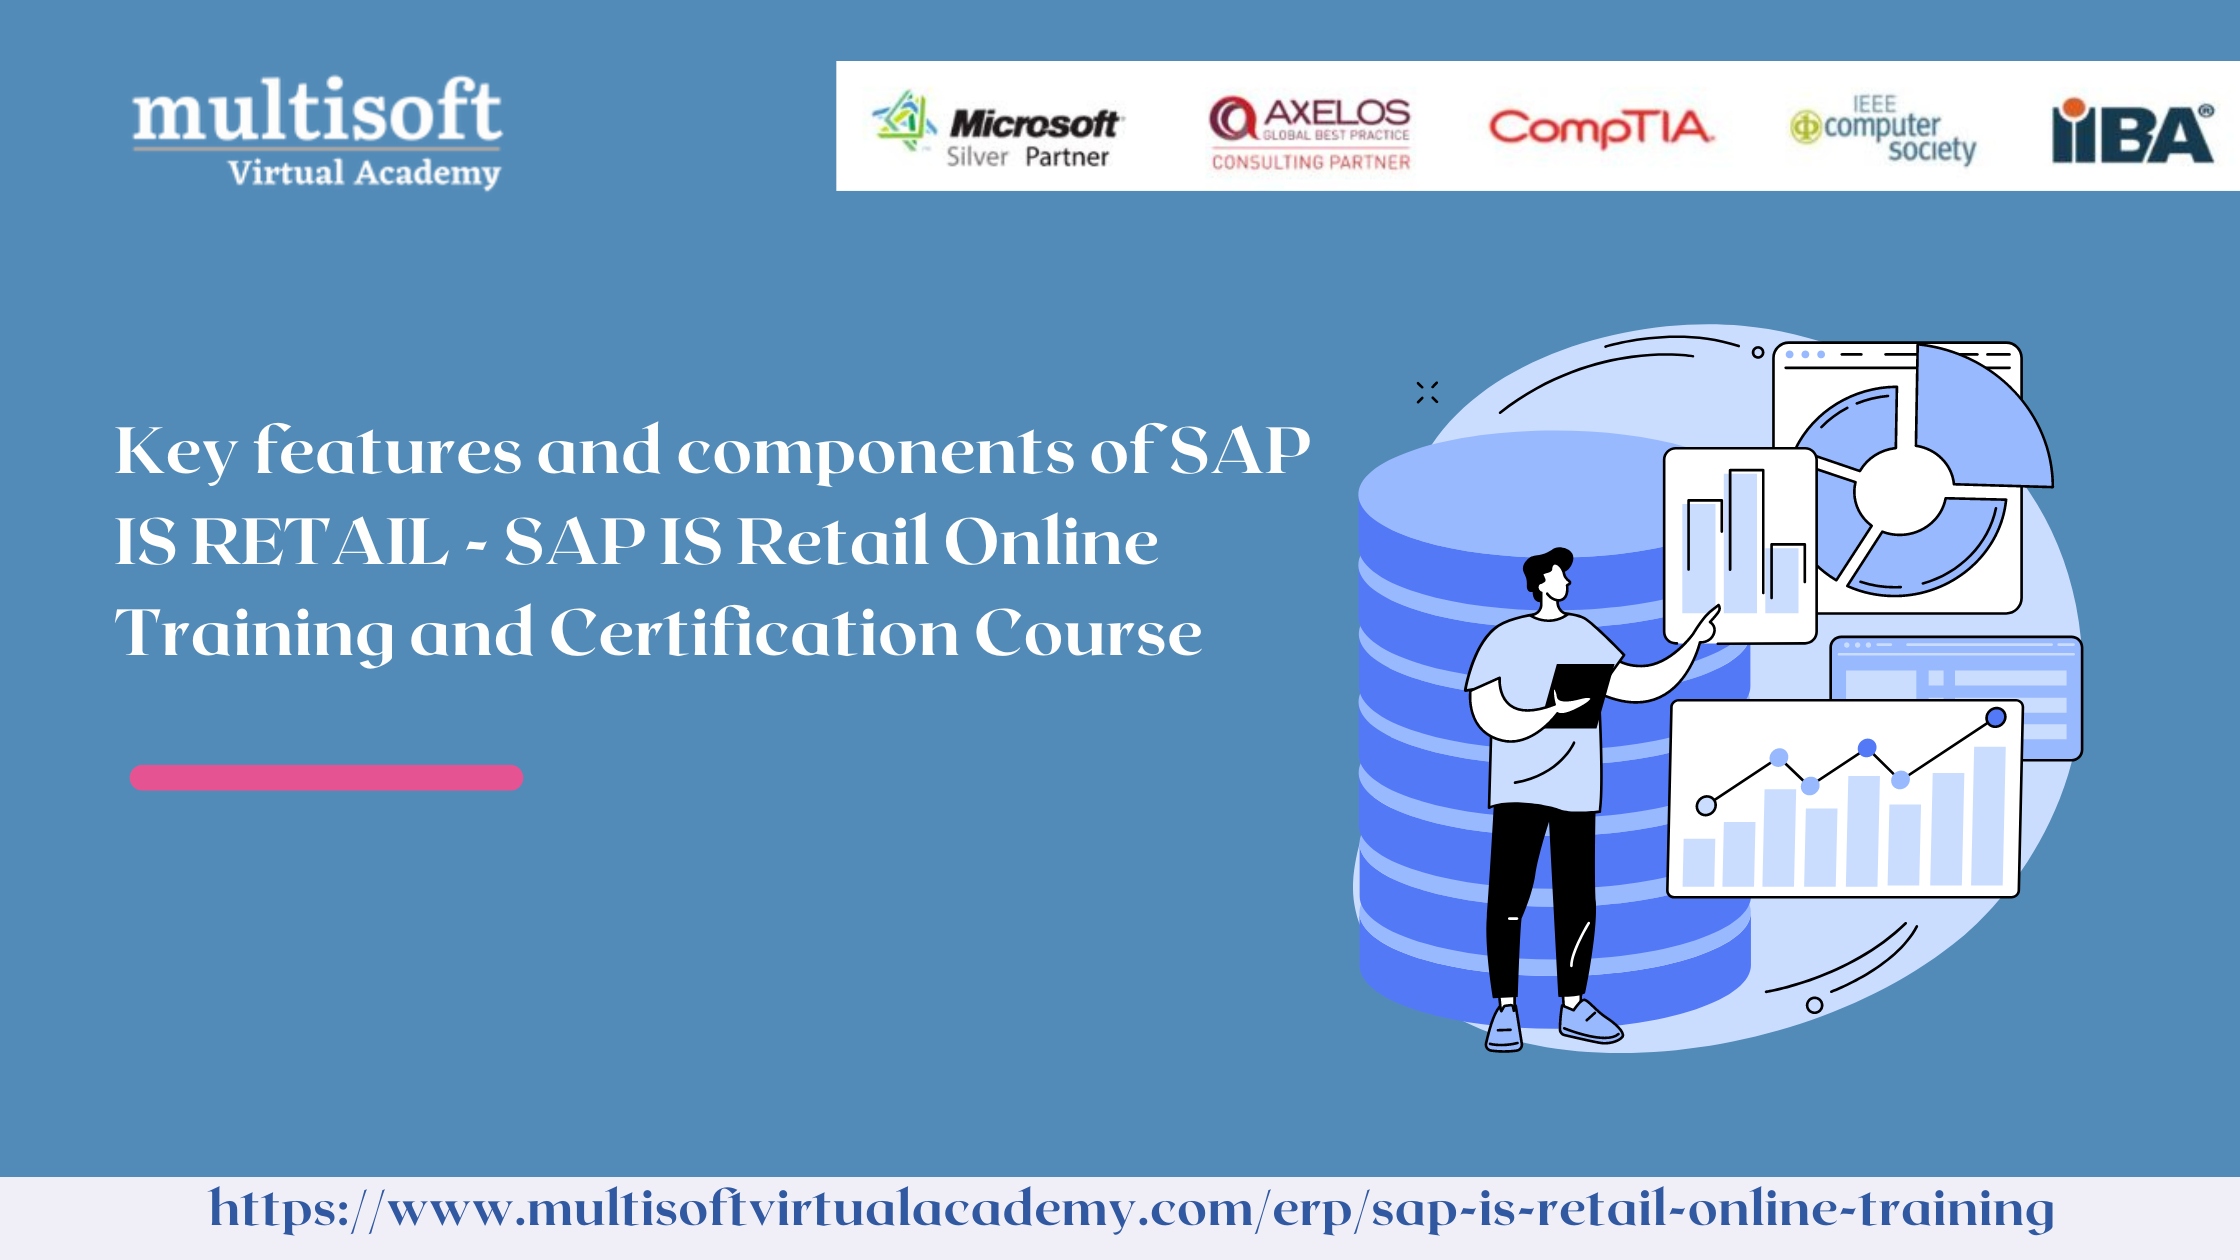 Key features and components of SAP IS RETAIL - SAP IS Retail Online Training and Certification Course